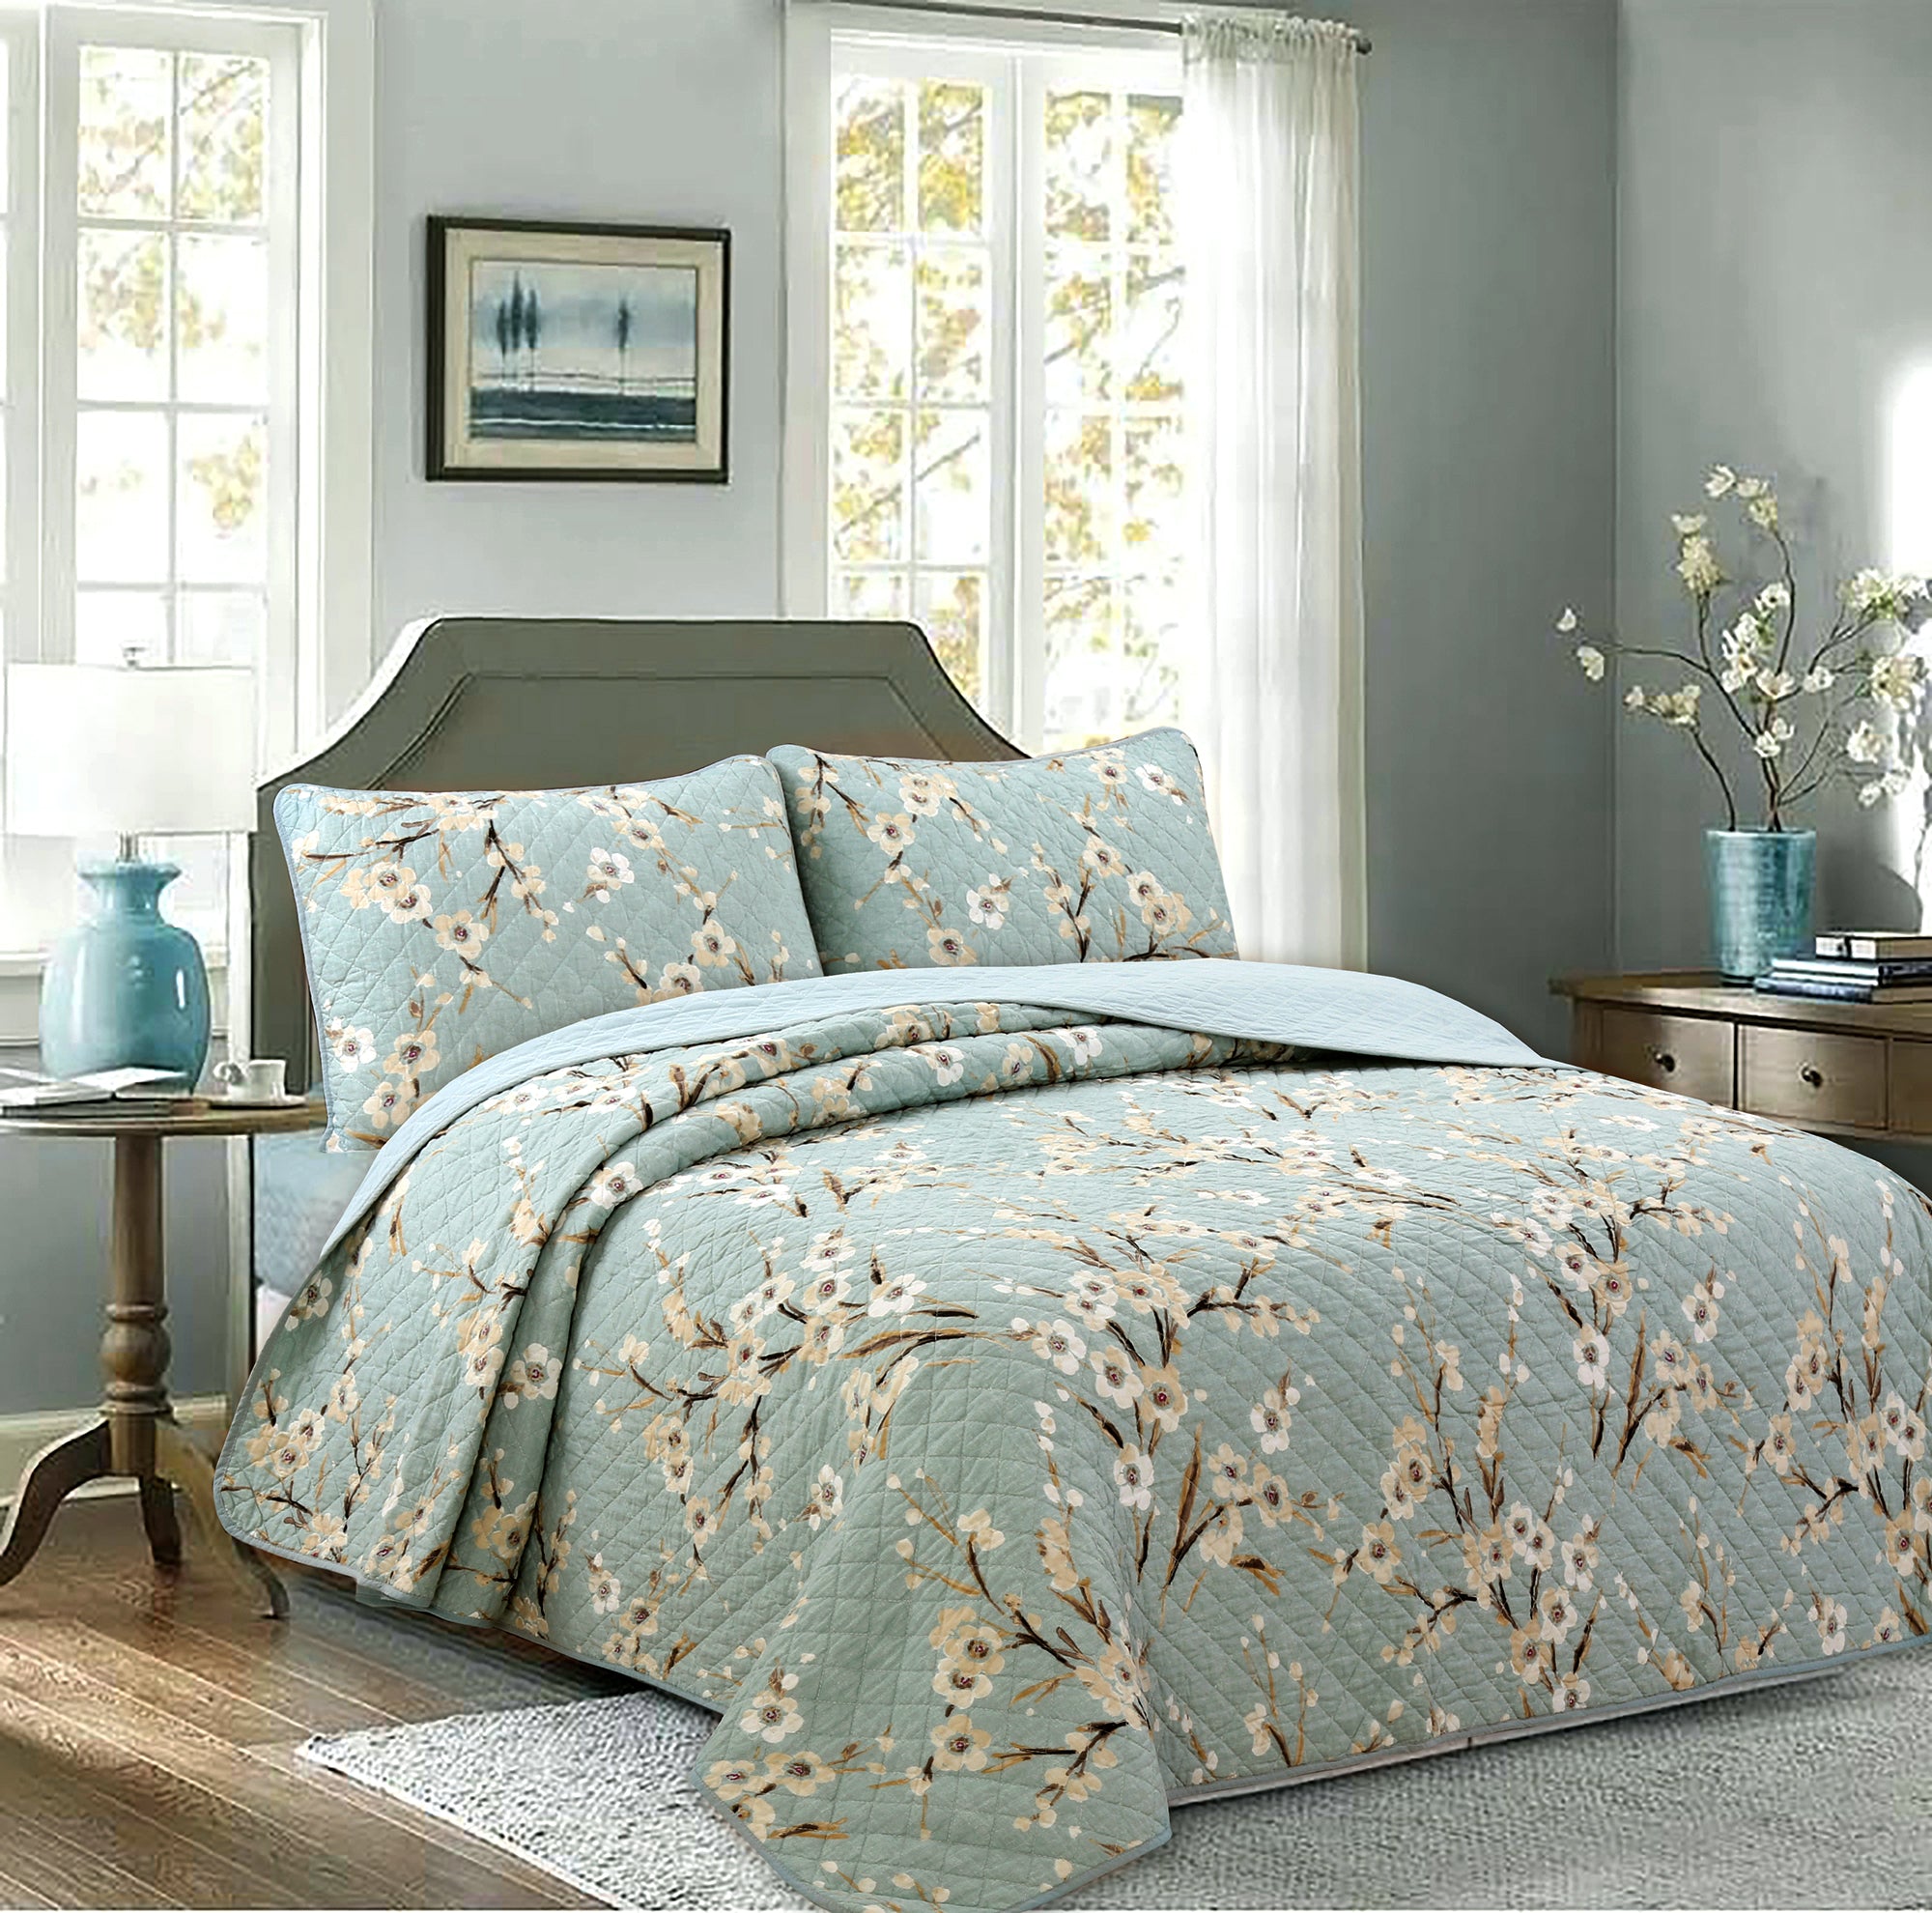 New Arrival – Cozy Line Home Fashions